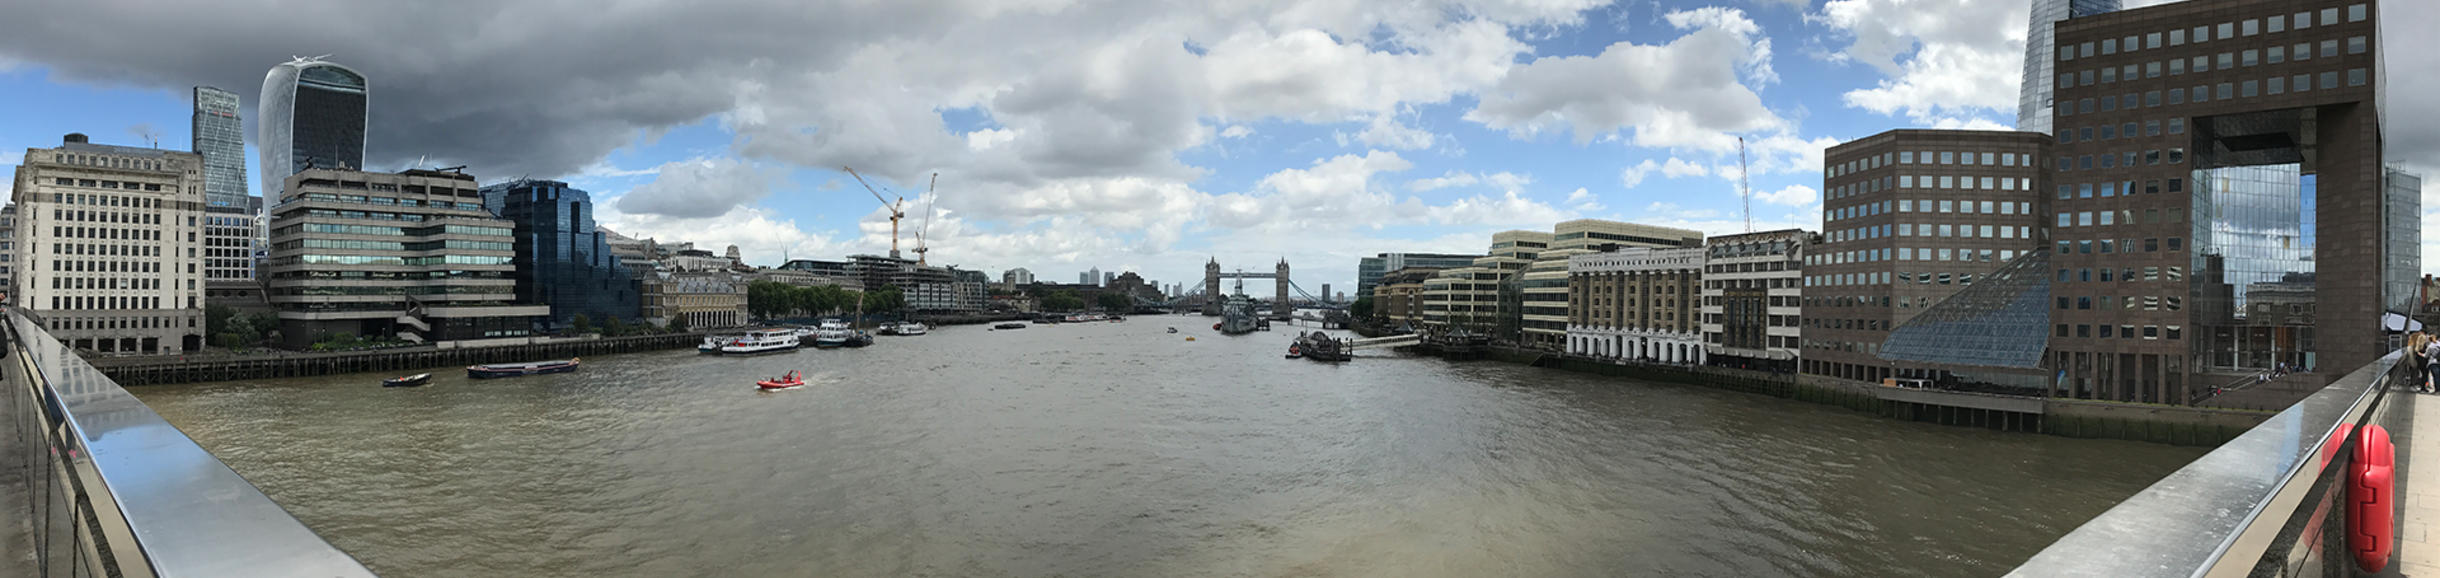 Photo of the River Thames in London with Tower Bridge in the distance